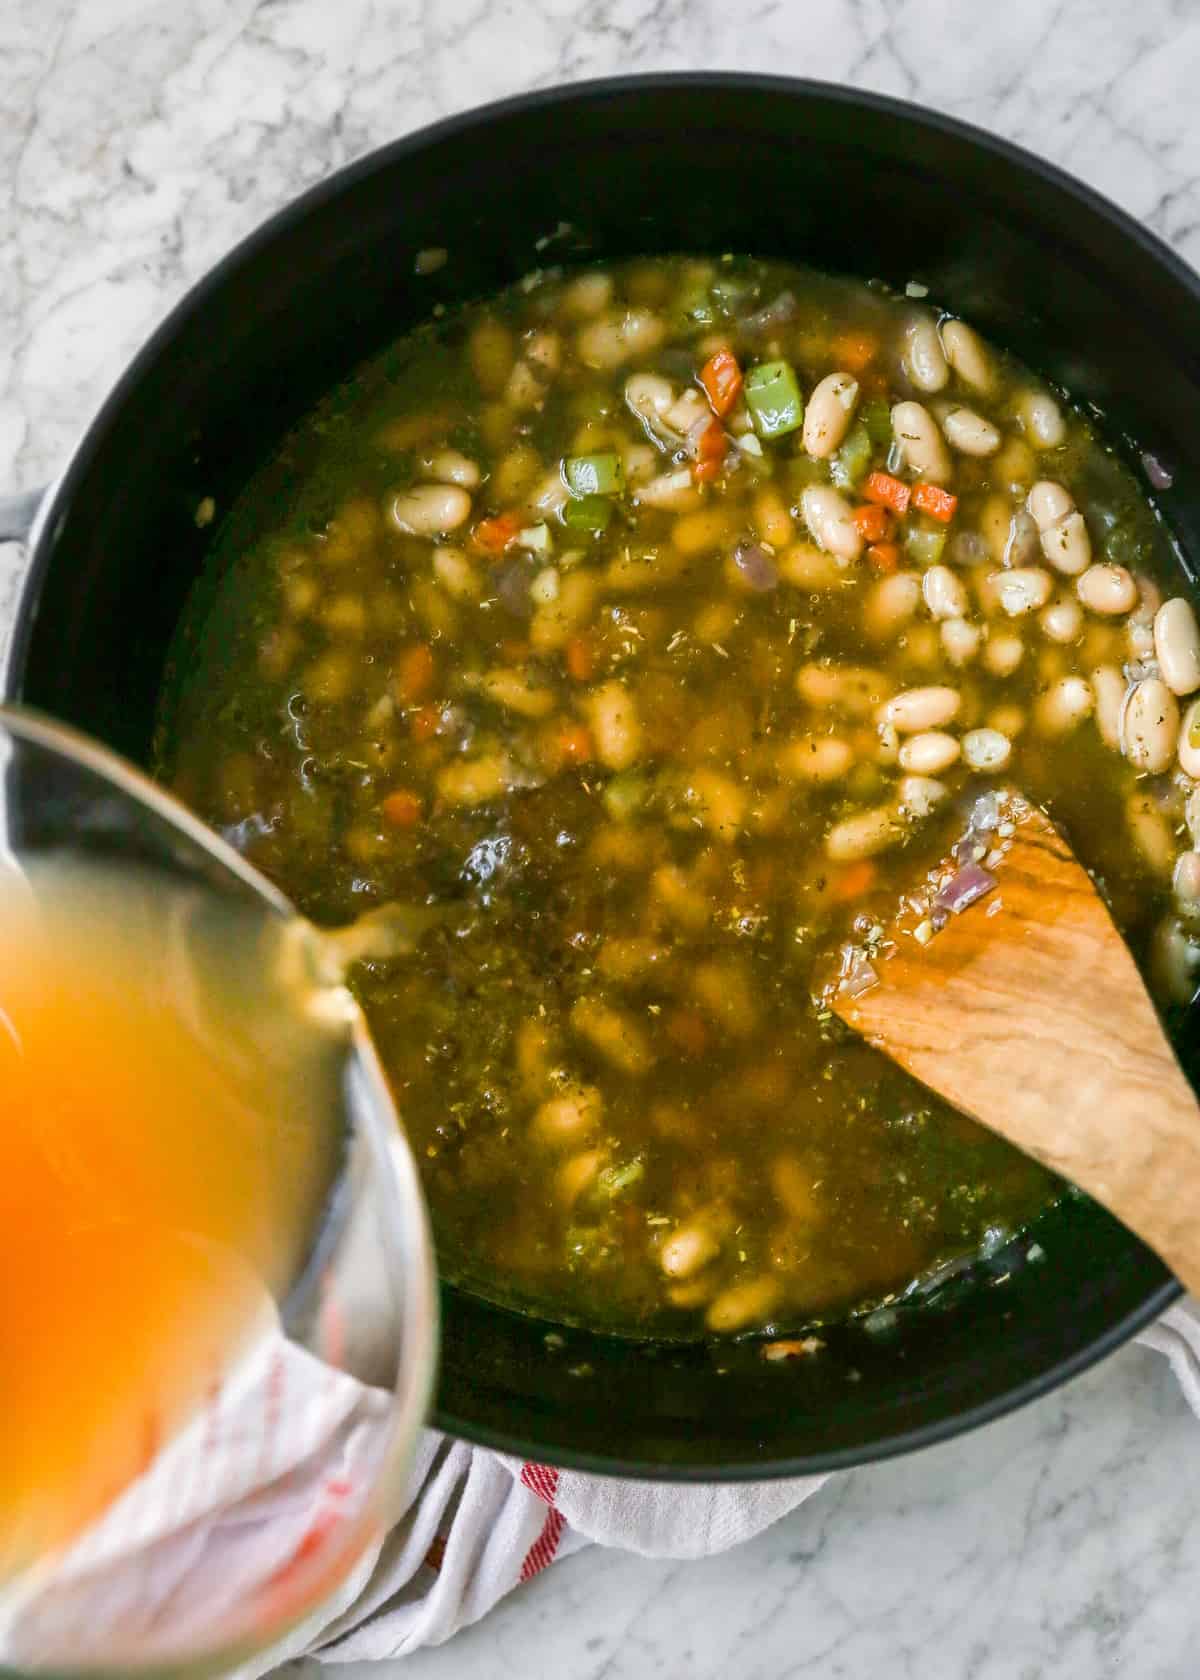 pouring vegetable broth into the soup